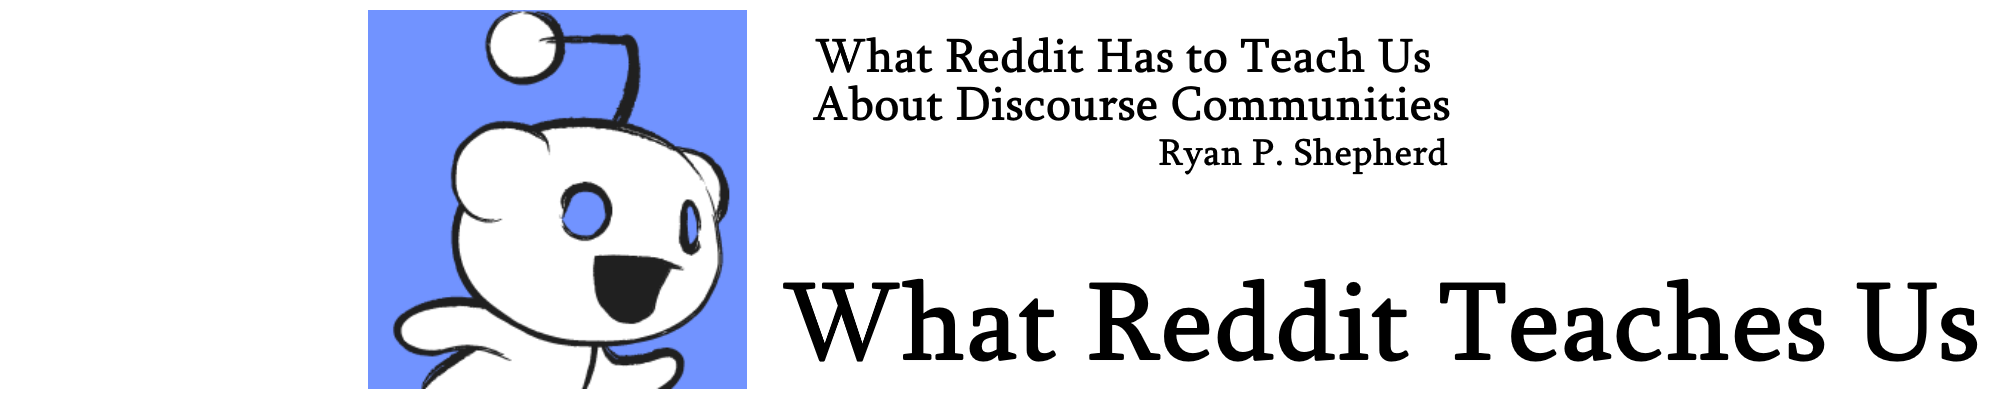 Banner reads What Reddit Has to Teach Us About Discourse Communities and What Reddit Teaches Us